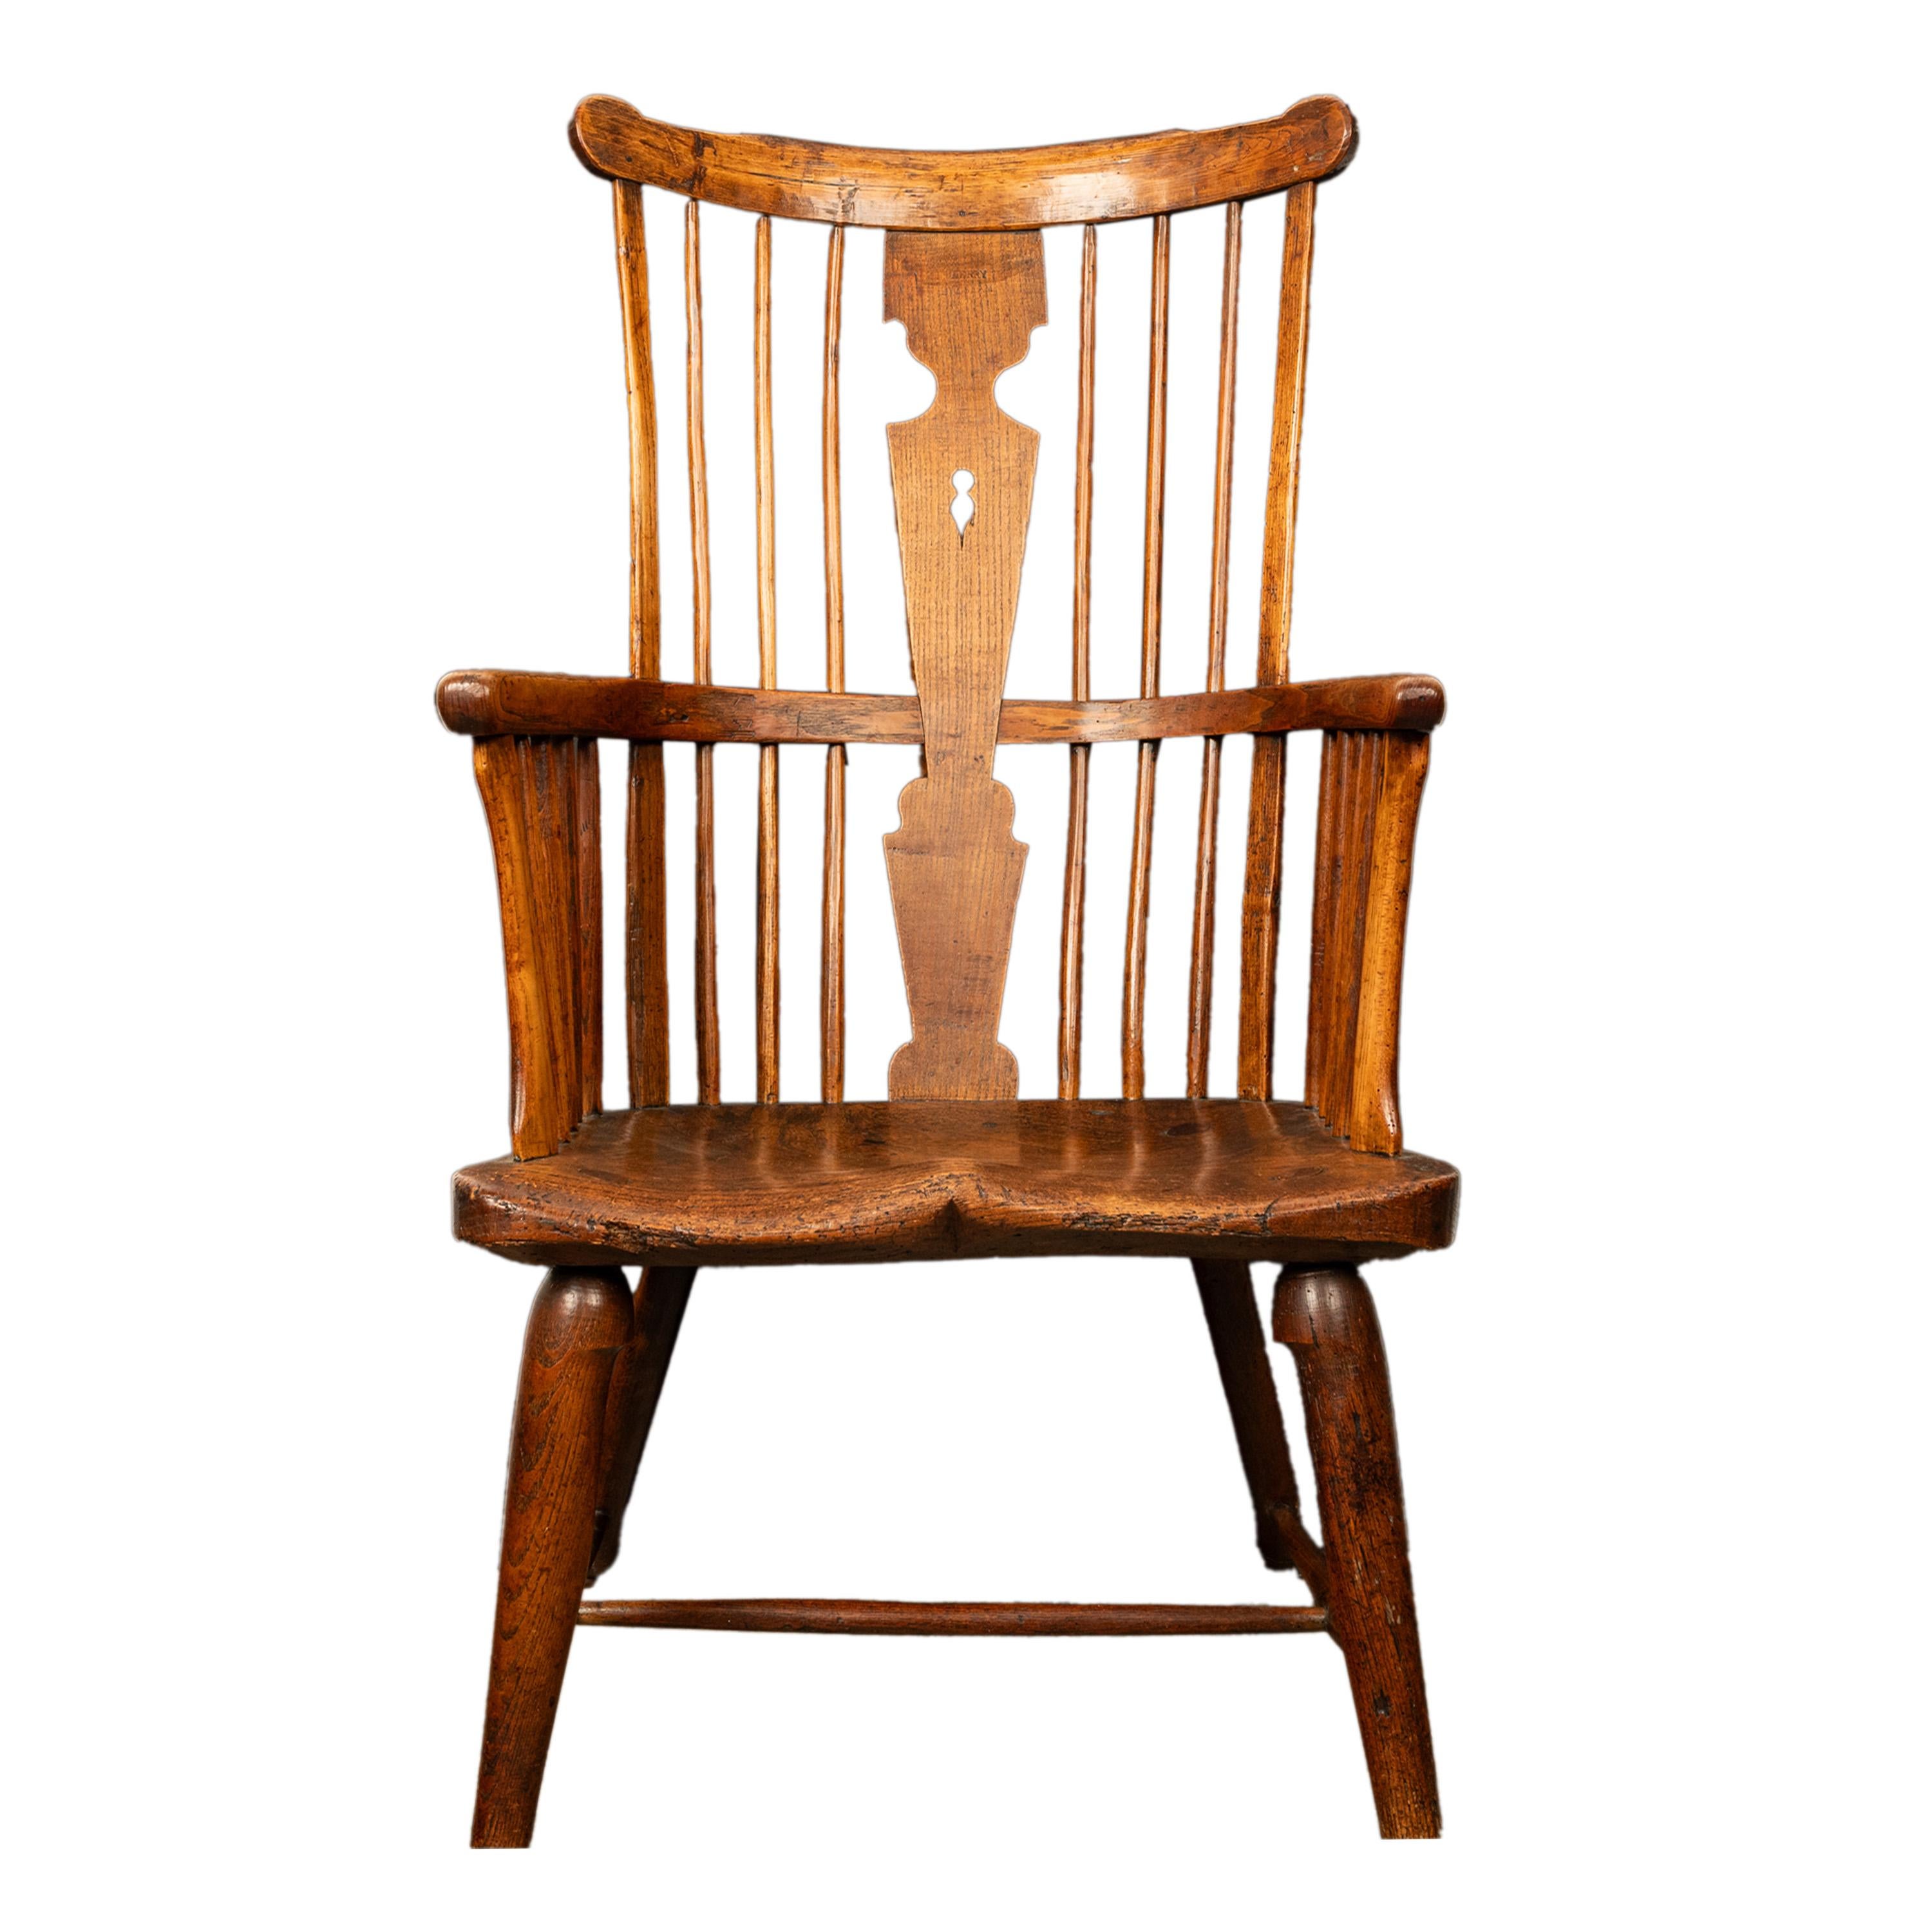 Important Antique Earliest Recorded English Windsor Chair by Kerry Evesham 1793 For Sale 4